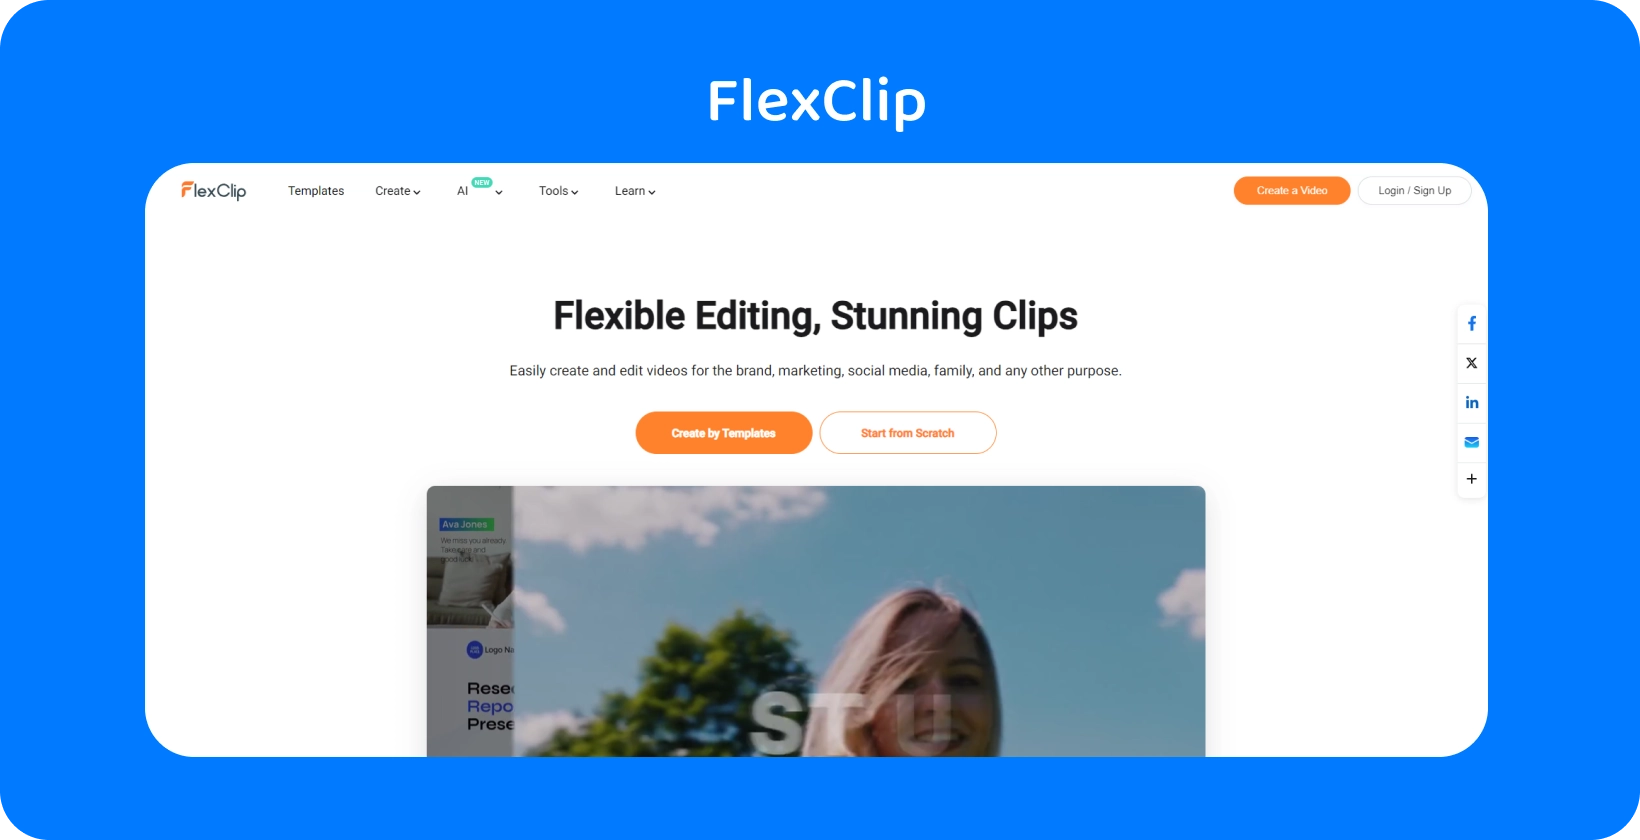 FlexClip's Text to Speech Video Maker interface shows a simple and efficient way to convert text to realistic AI speech.